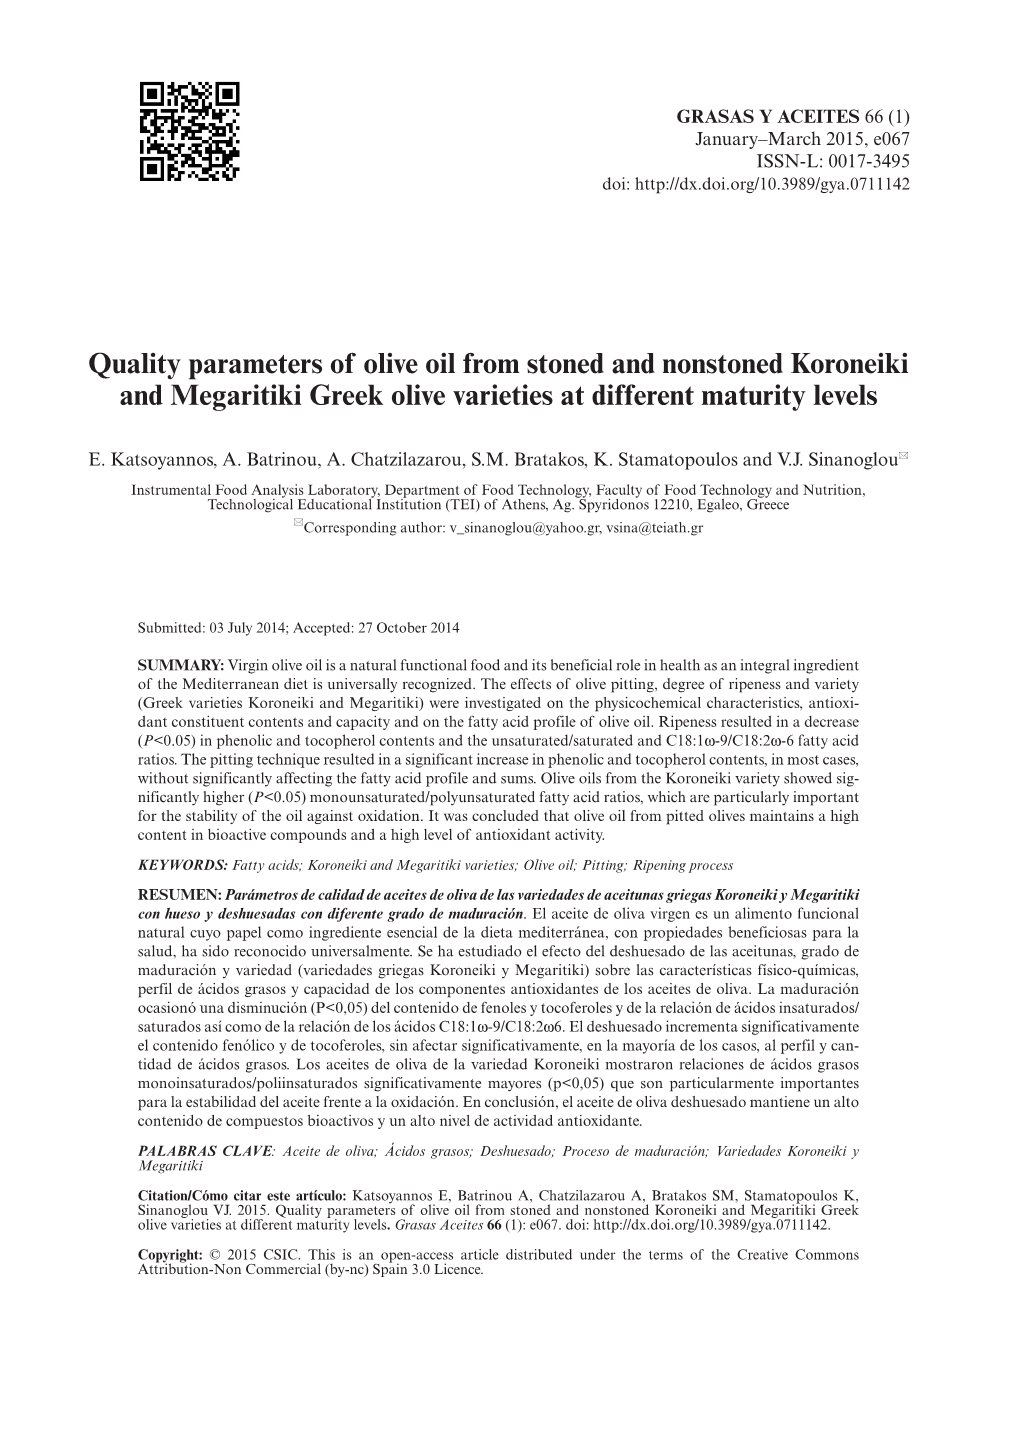 Quality Parameters of Olive Oil from Stoned and Nonstoned Koroneiki and Megaritiki Greek Olive Varieties at Different Maturity Levels